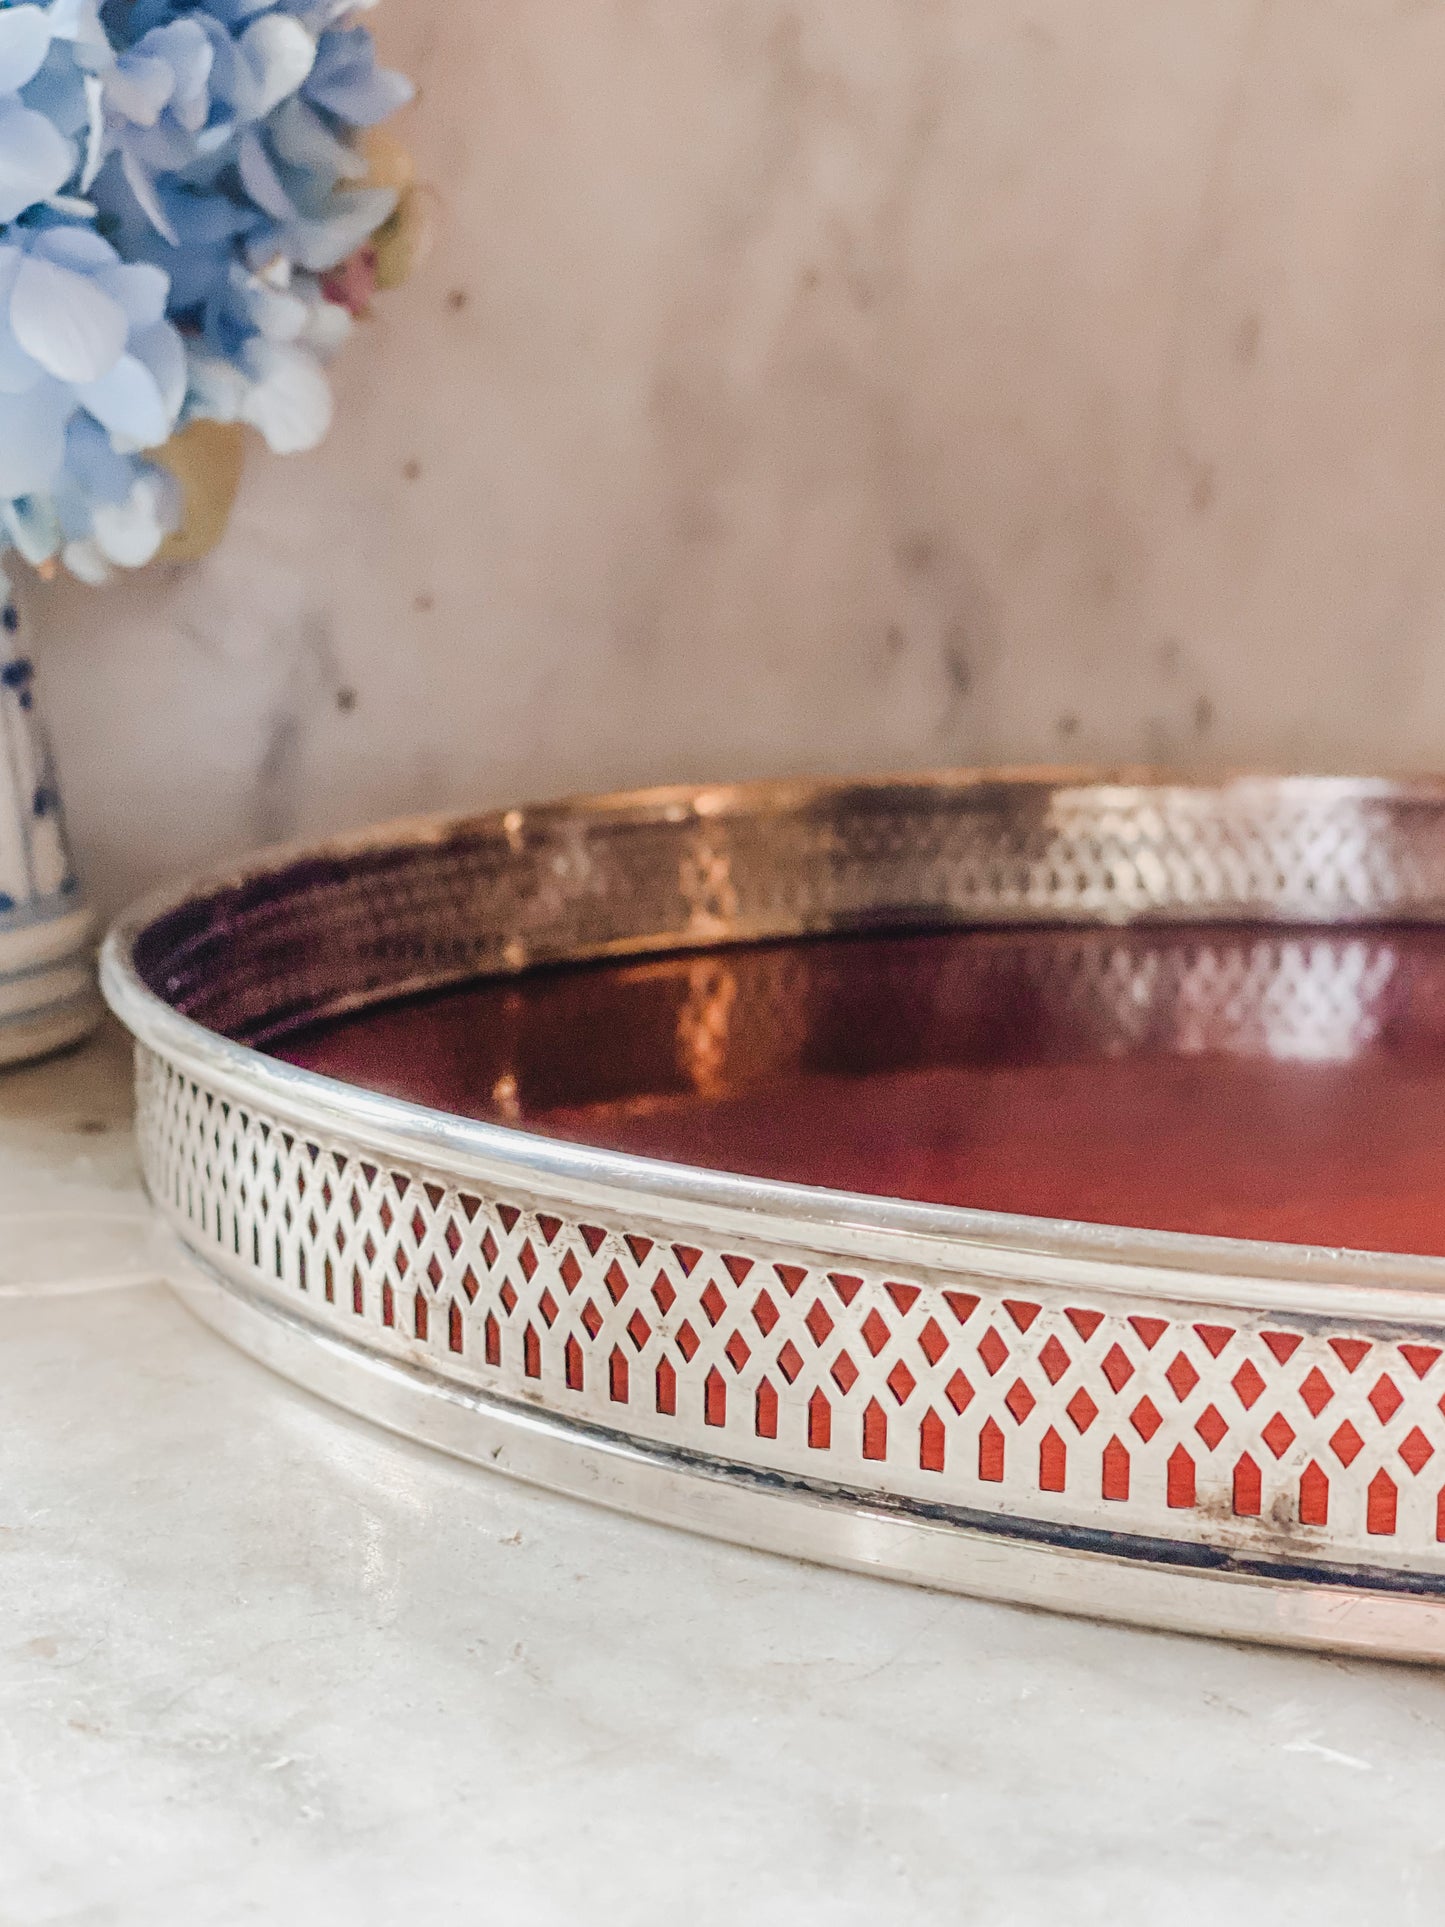 STERLING SILVER Tray Made by the Oldest Silversmith Company in the US